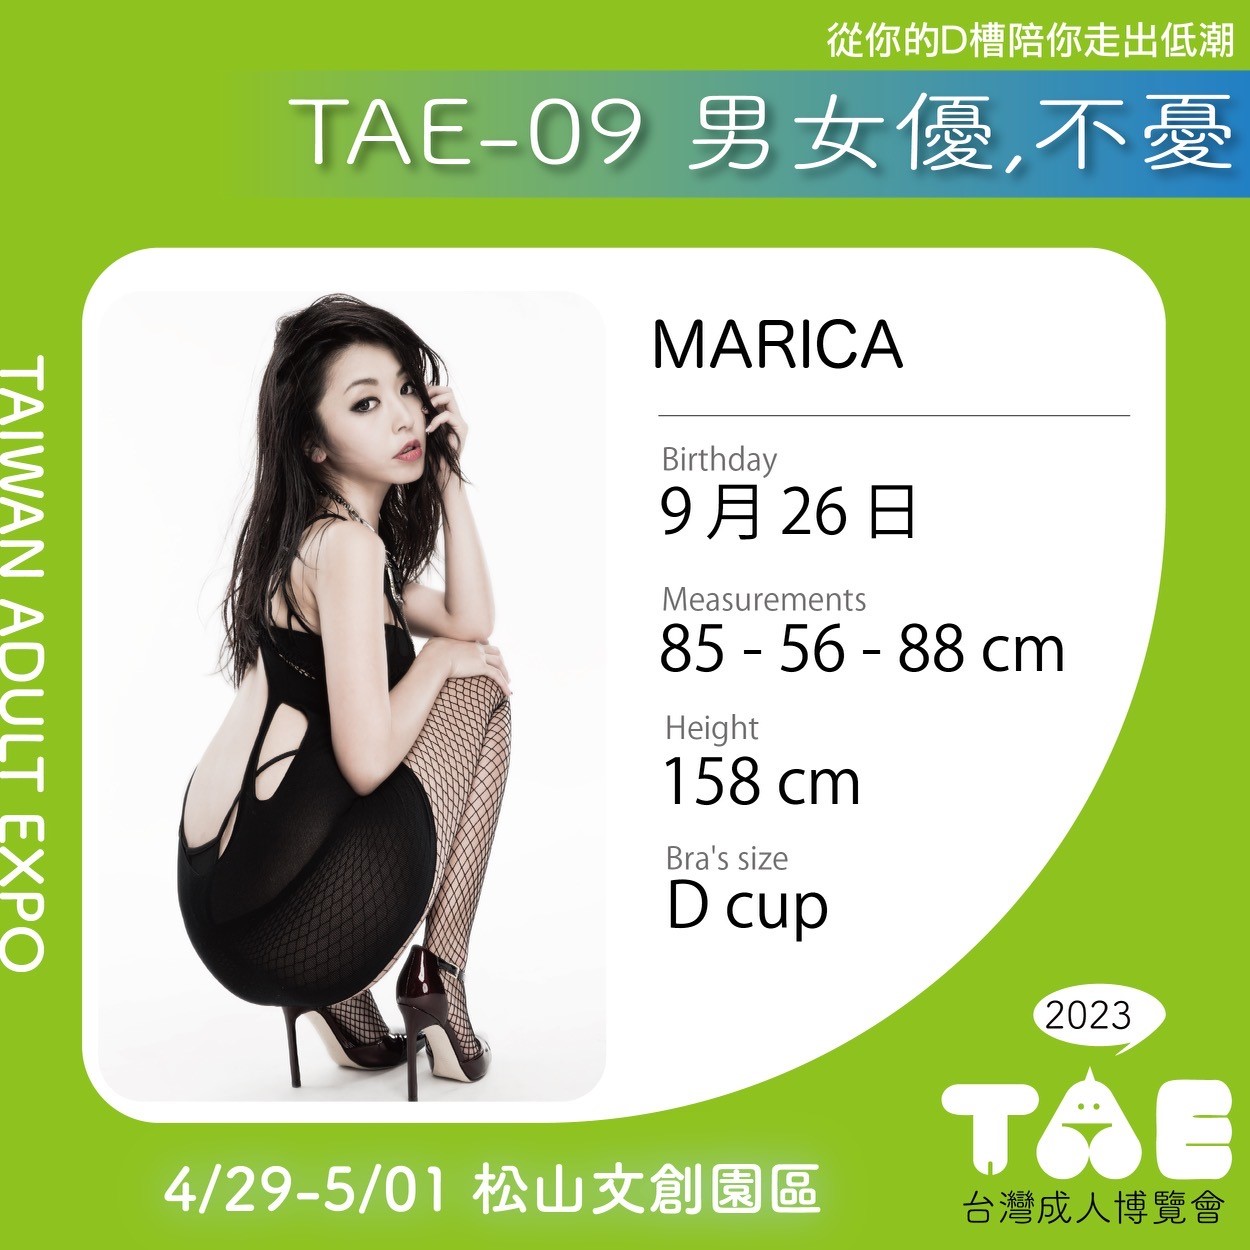 Marica Hase Announces Taiwan Adult Expo Appearance So Worldwide Fans Can Be There